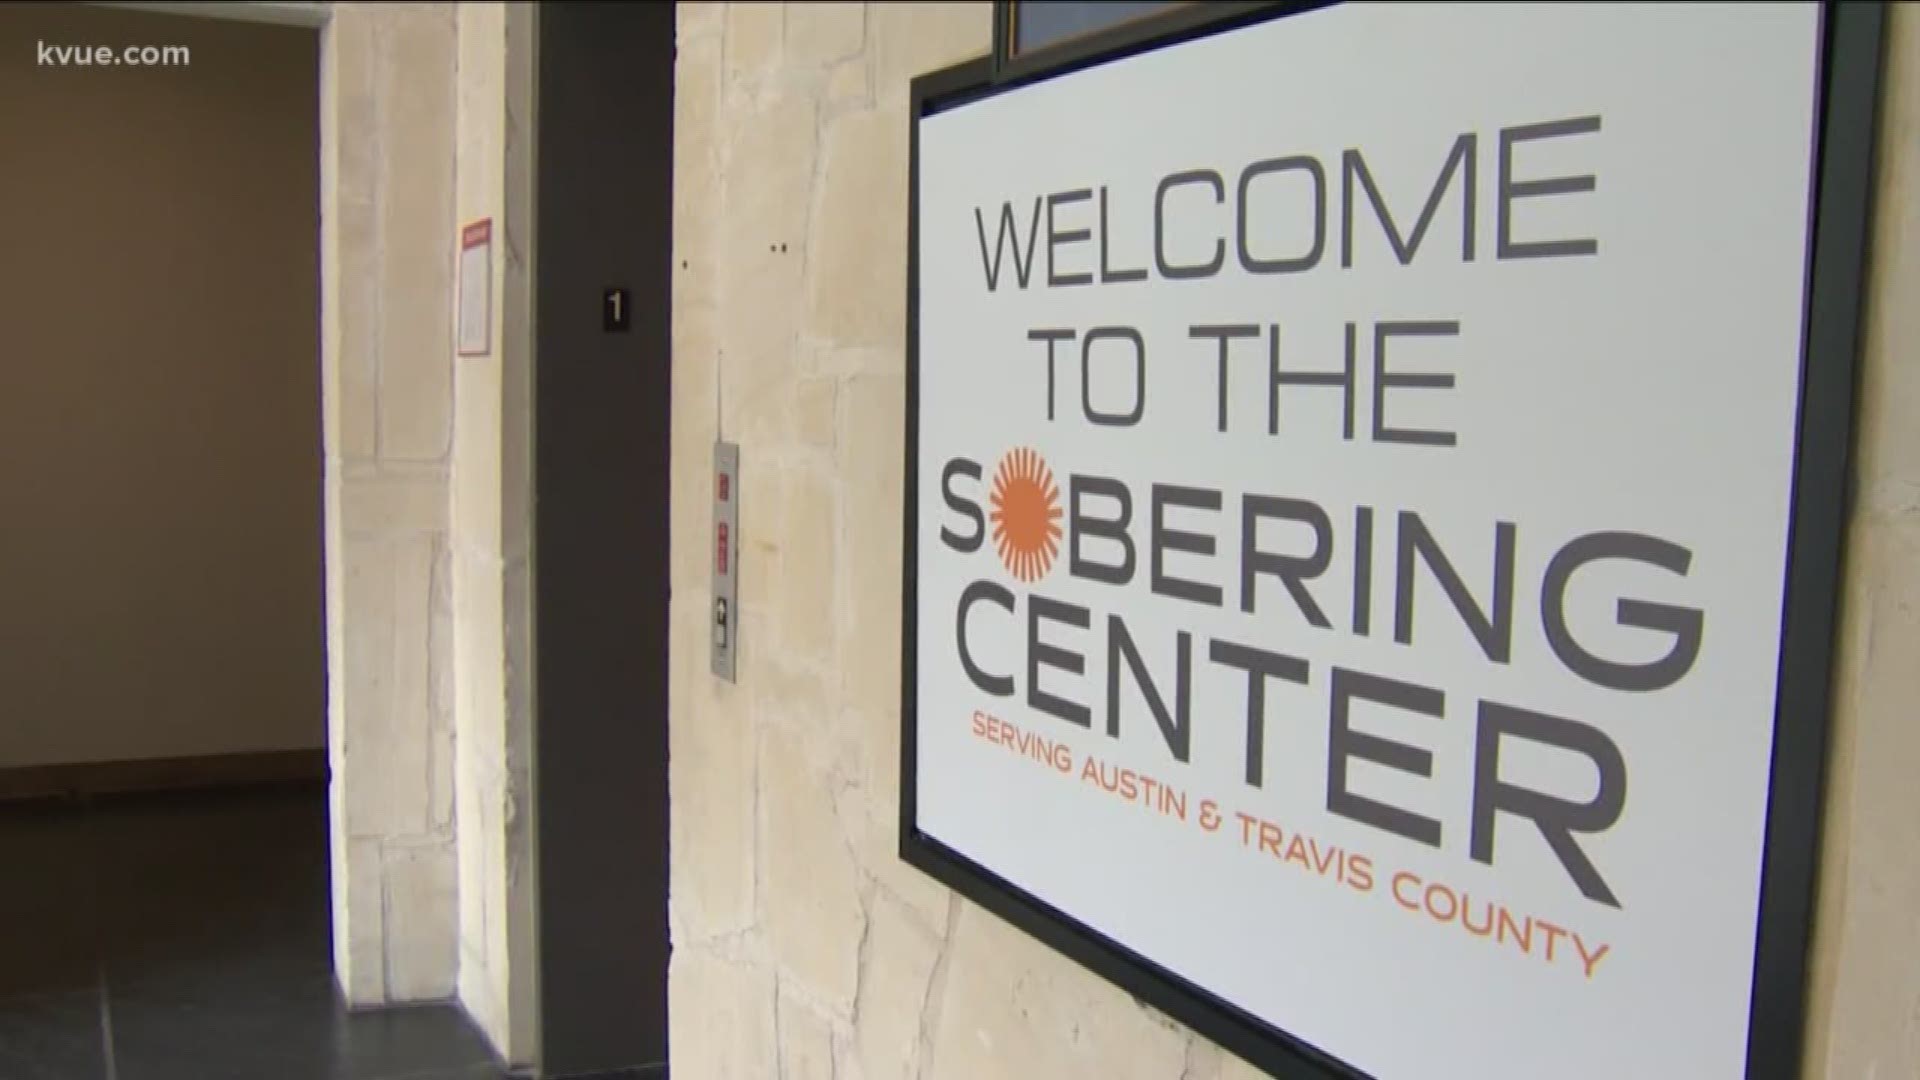 We checked in with the Sobering Center to see how they're doing since opening in 2018.